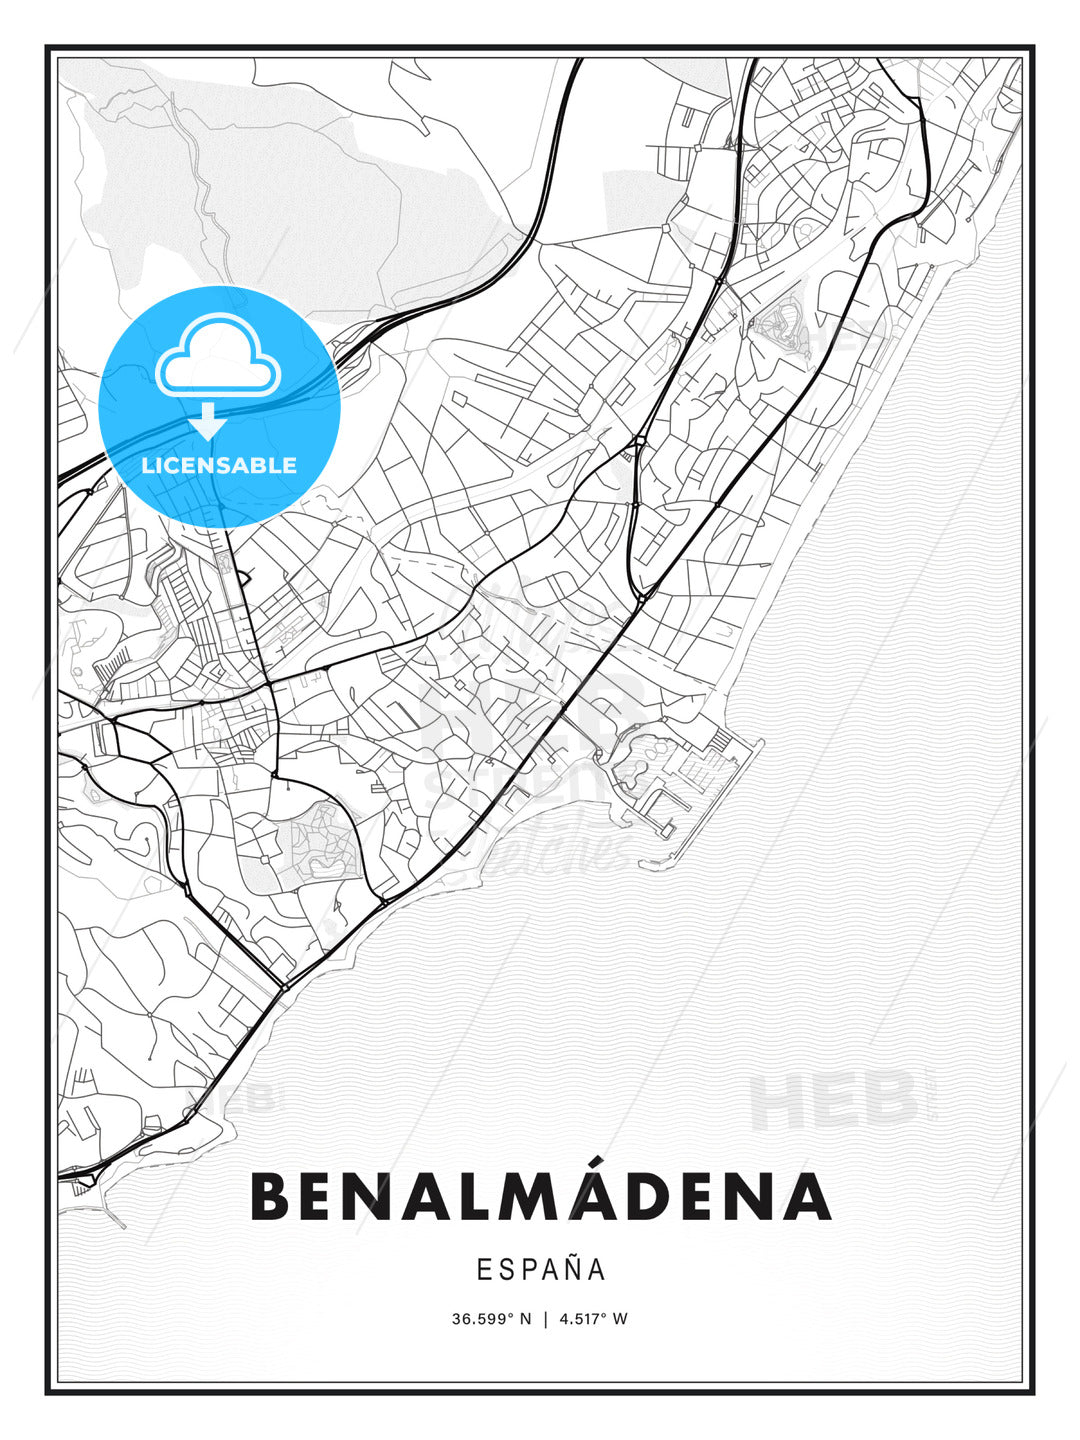 Benalmádena, Spain, Modern Print Template in Various Formats - HEBSTREITS Sketches